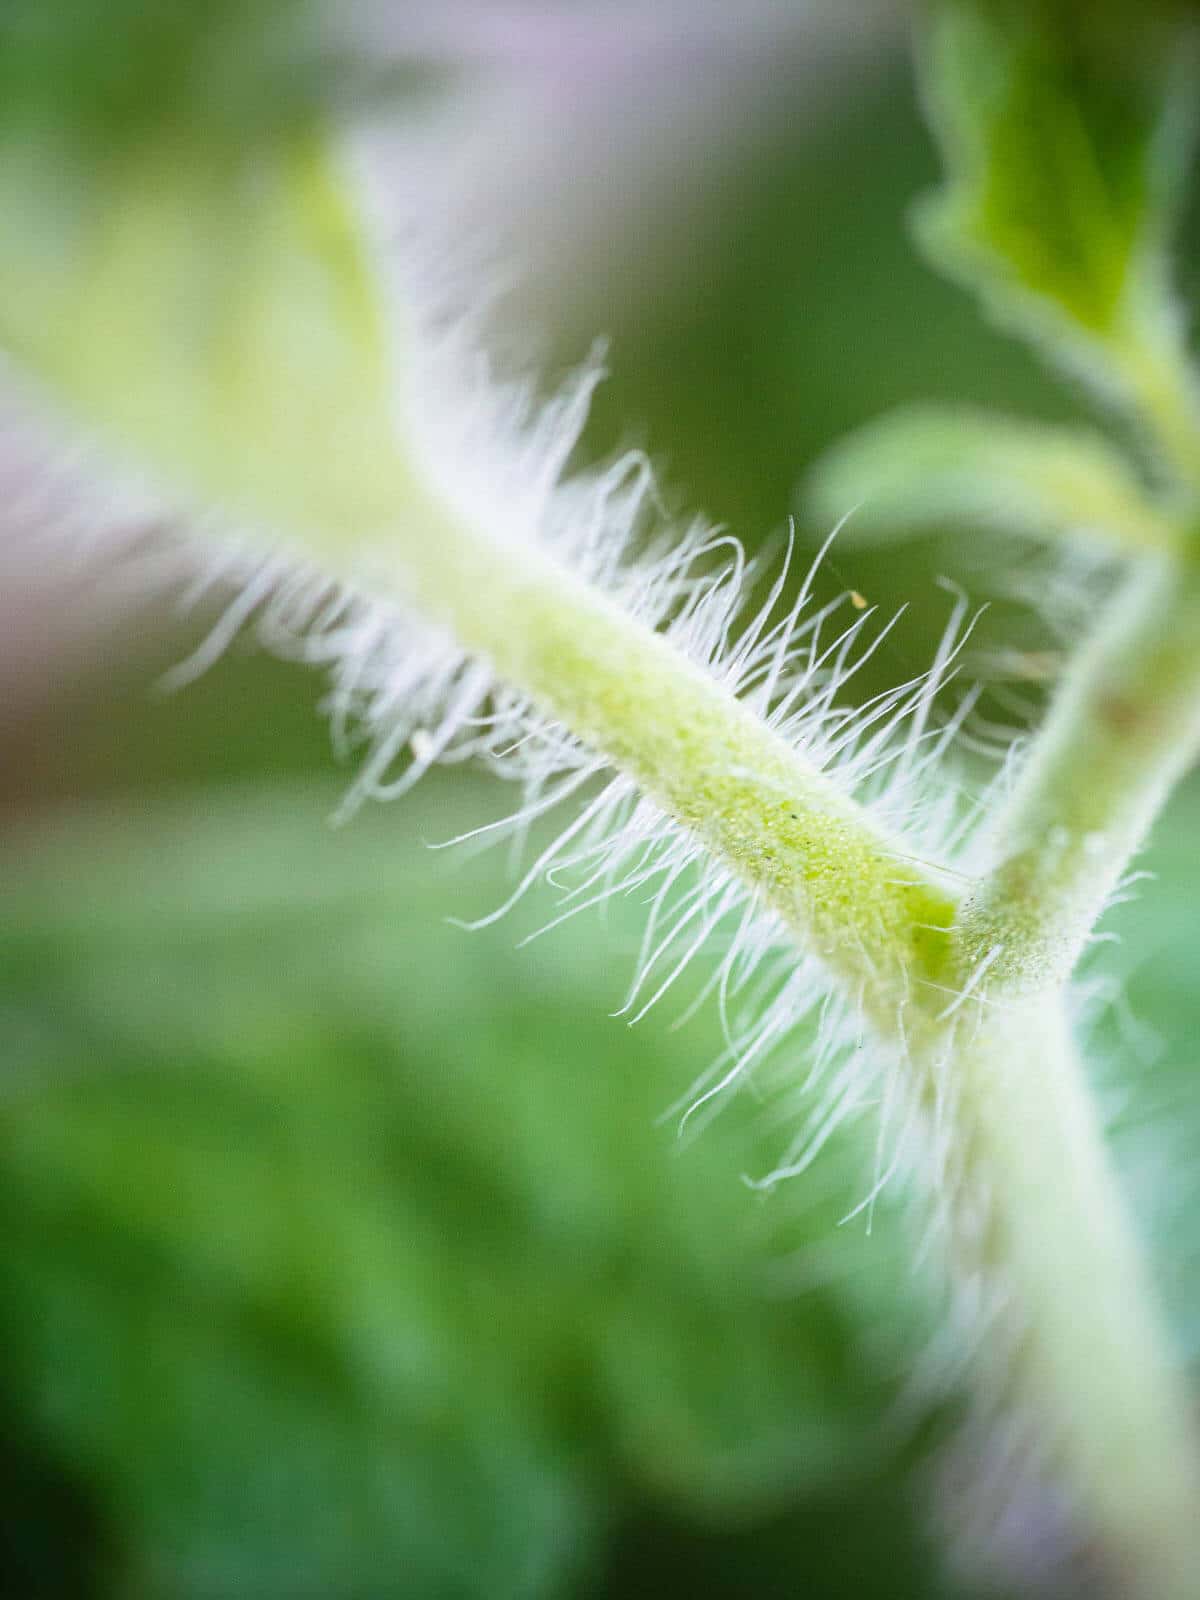 Trichomes are short, fine, hair-like structures on tomato stems